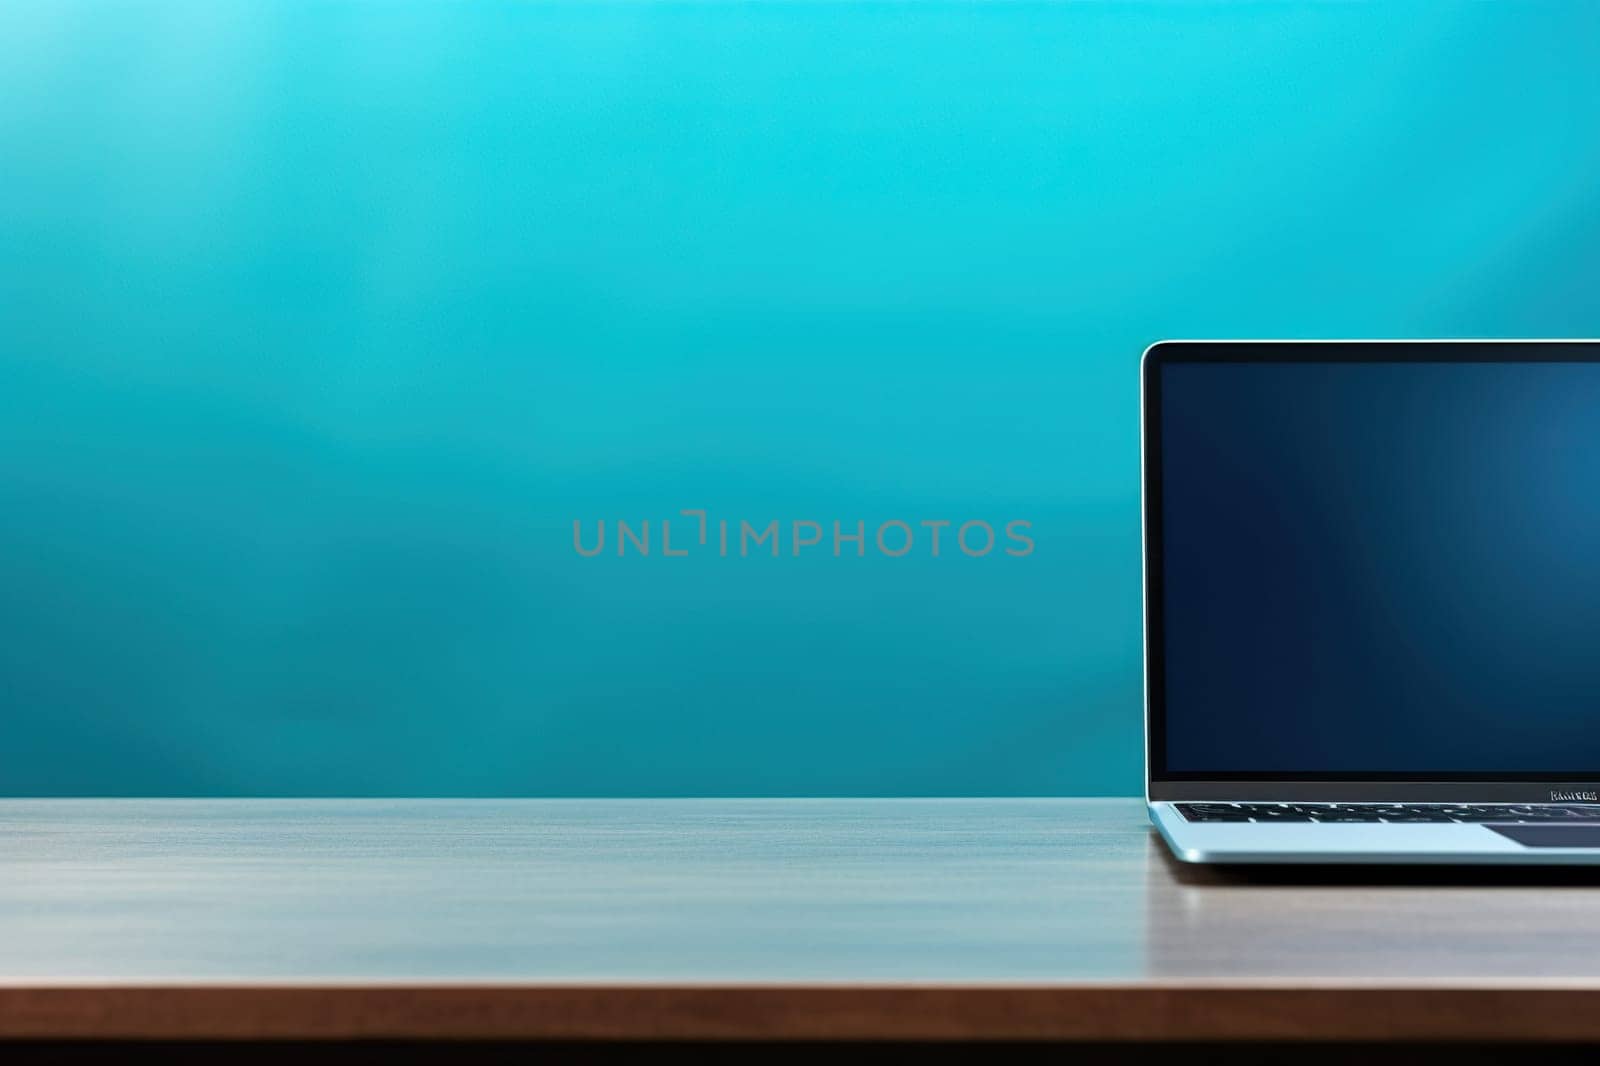 Horizontal blurred background with a laptop on the right on a wooden table.